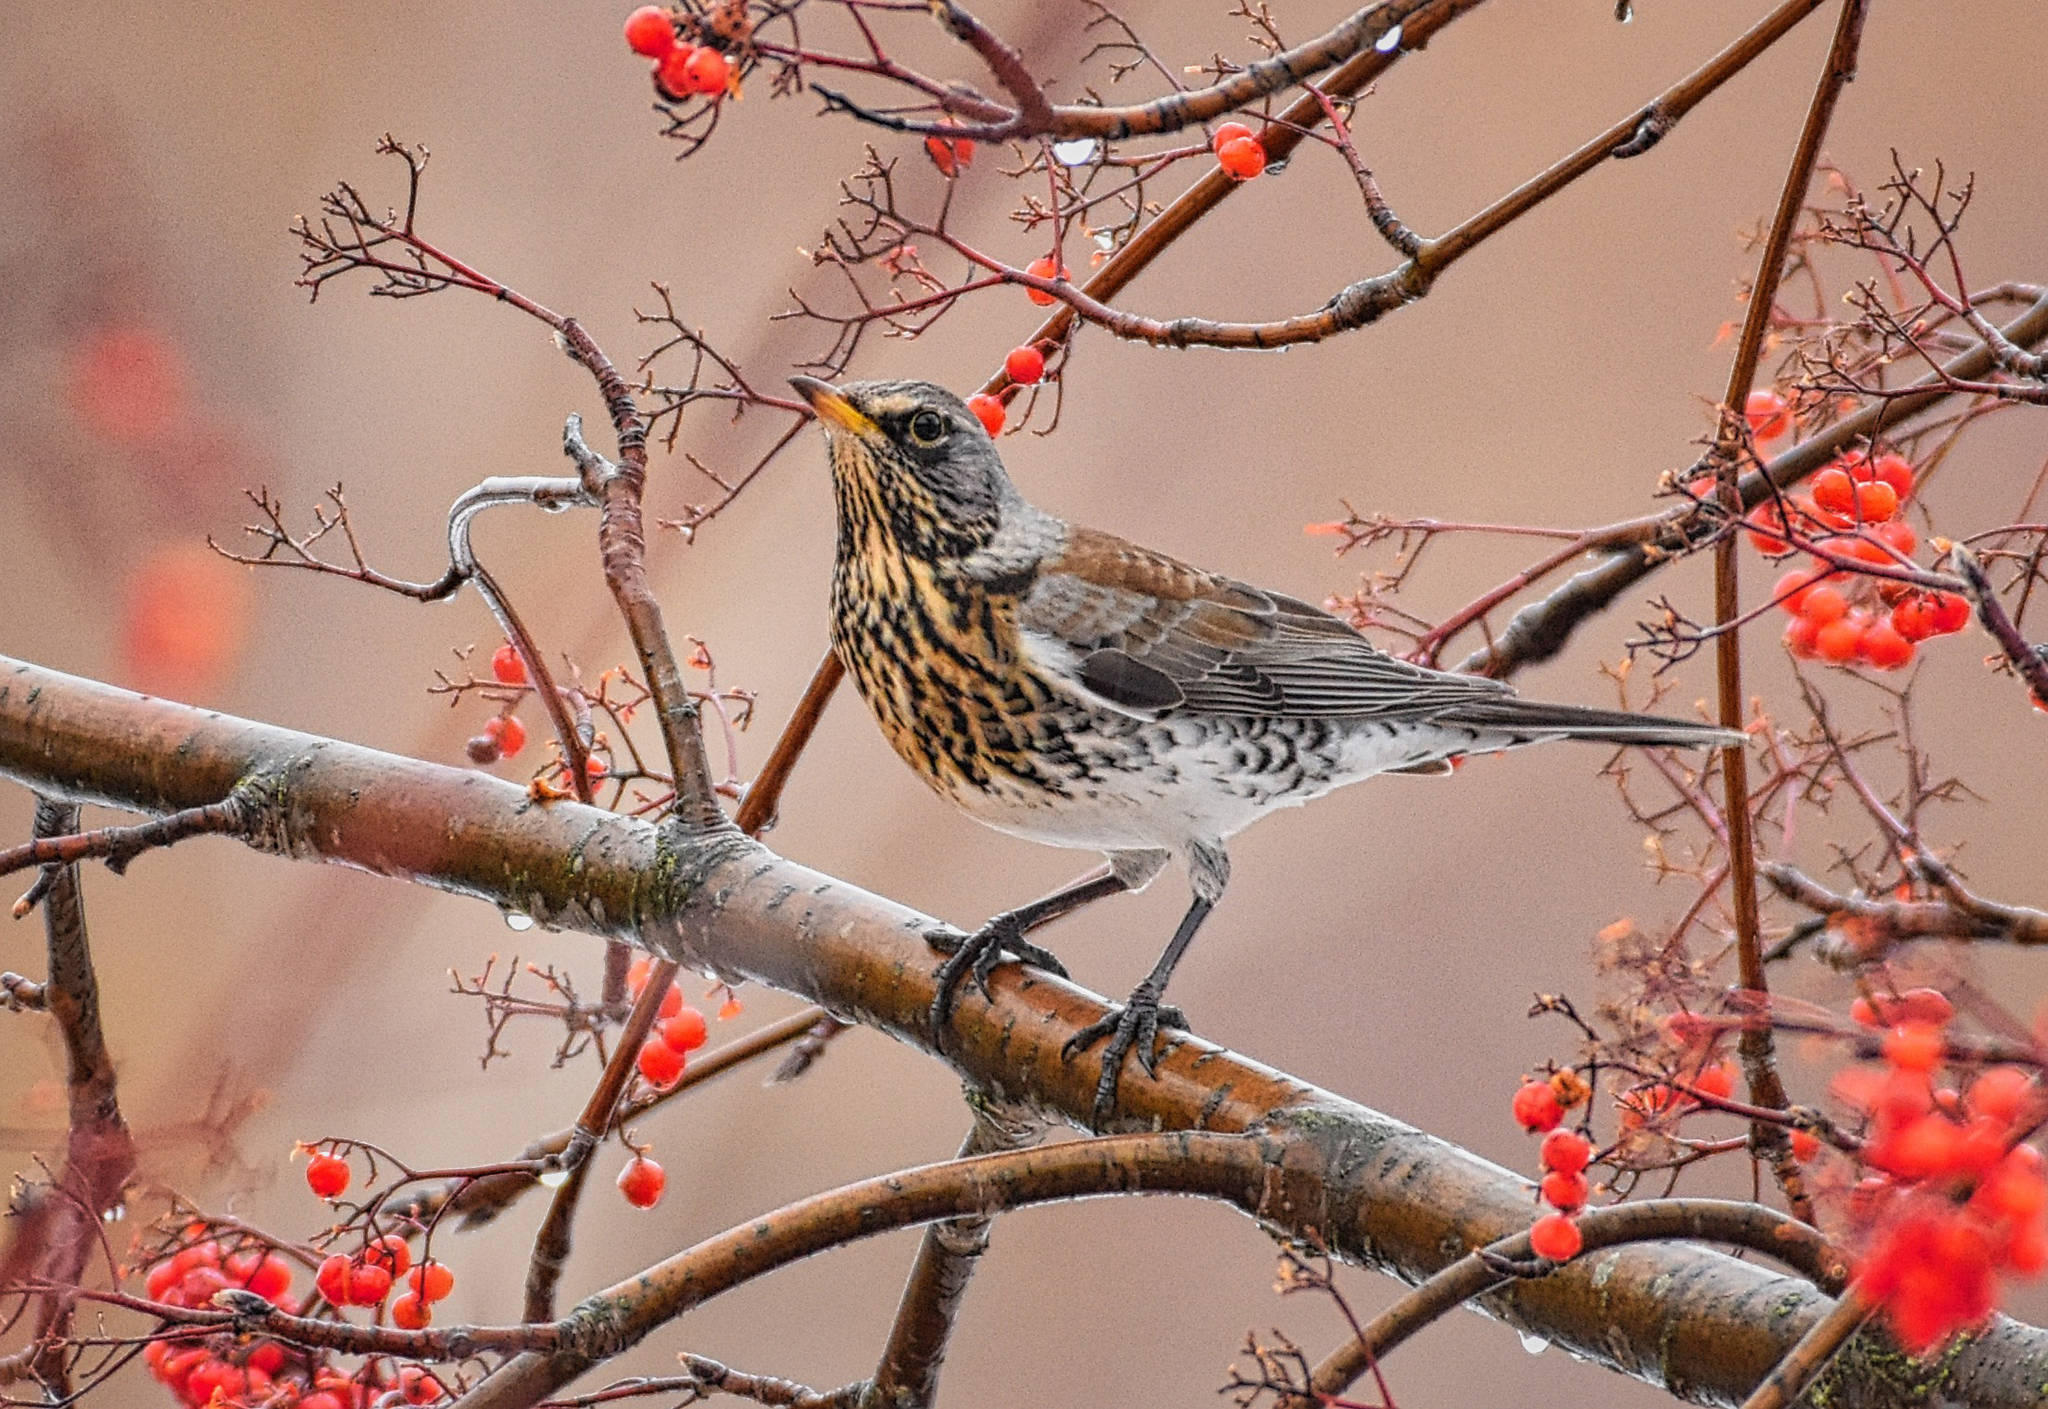 Native to northern Europe and Asia, this fieldfare, a member of the thrush family, has caused a stir by making a rare appearance in Salmon Arm. The bird was spotted by Nan Bearmore among a flock of robins during the Dec. 16 bird count. (Roger Beardmore photo)